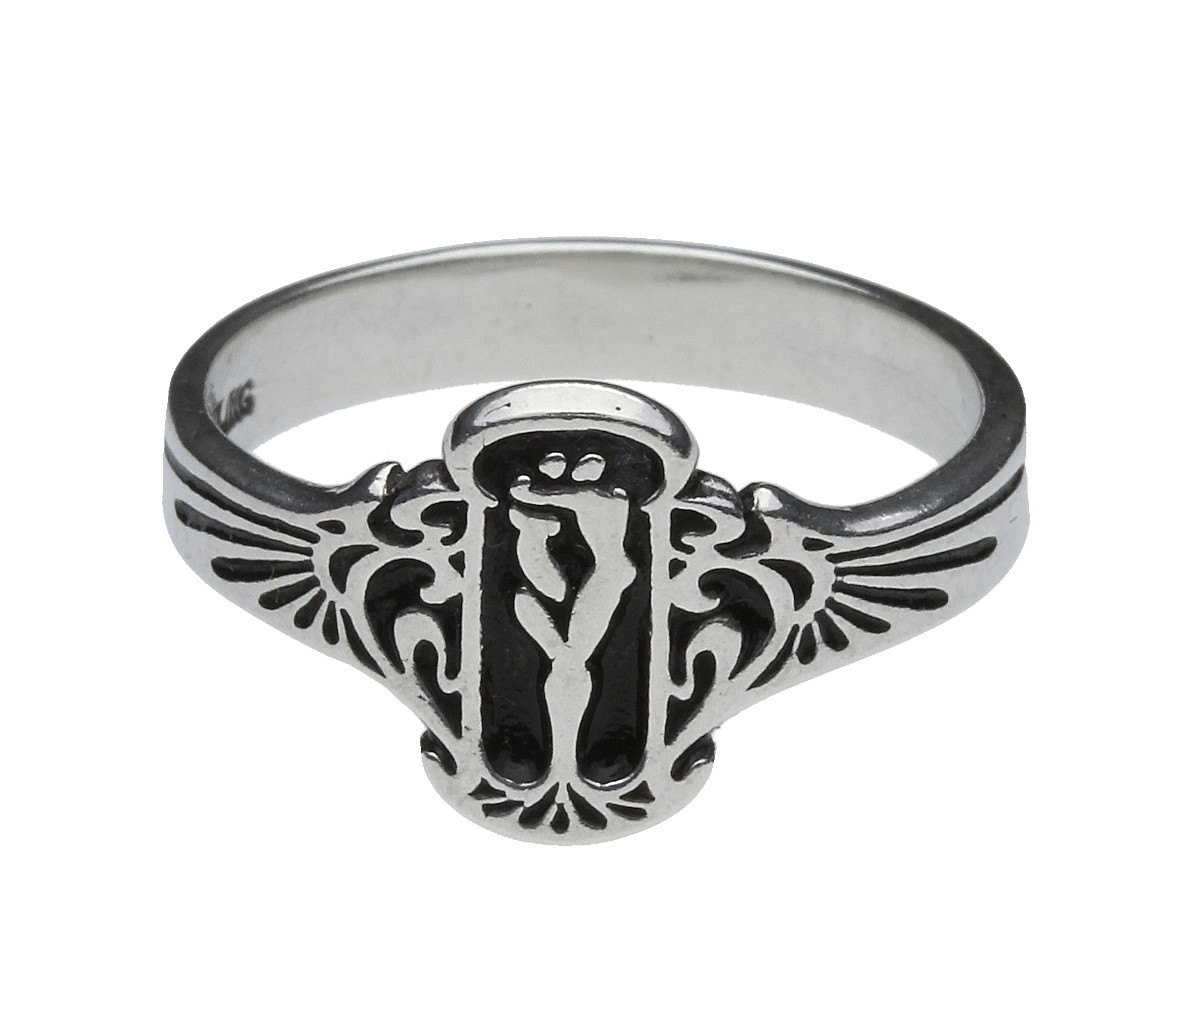 Soulmates Lover's Tale Handmade Sterling Silver Ring